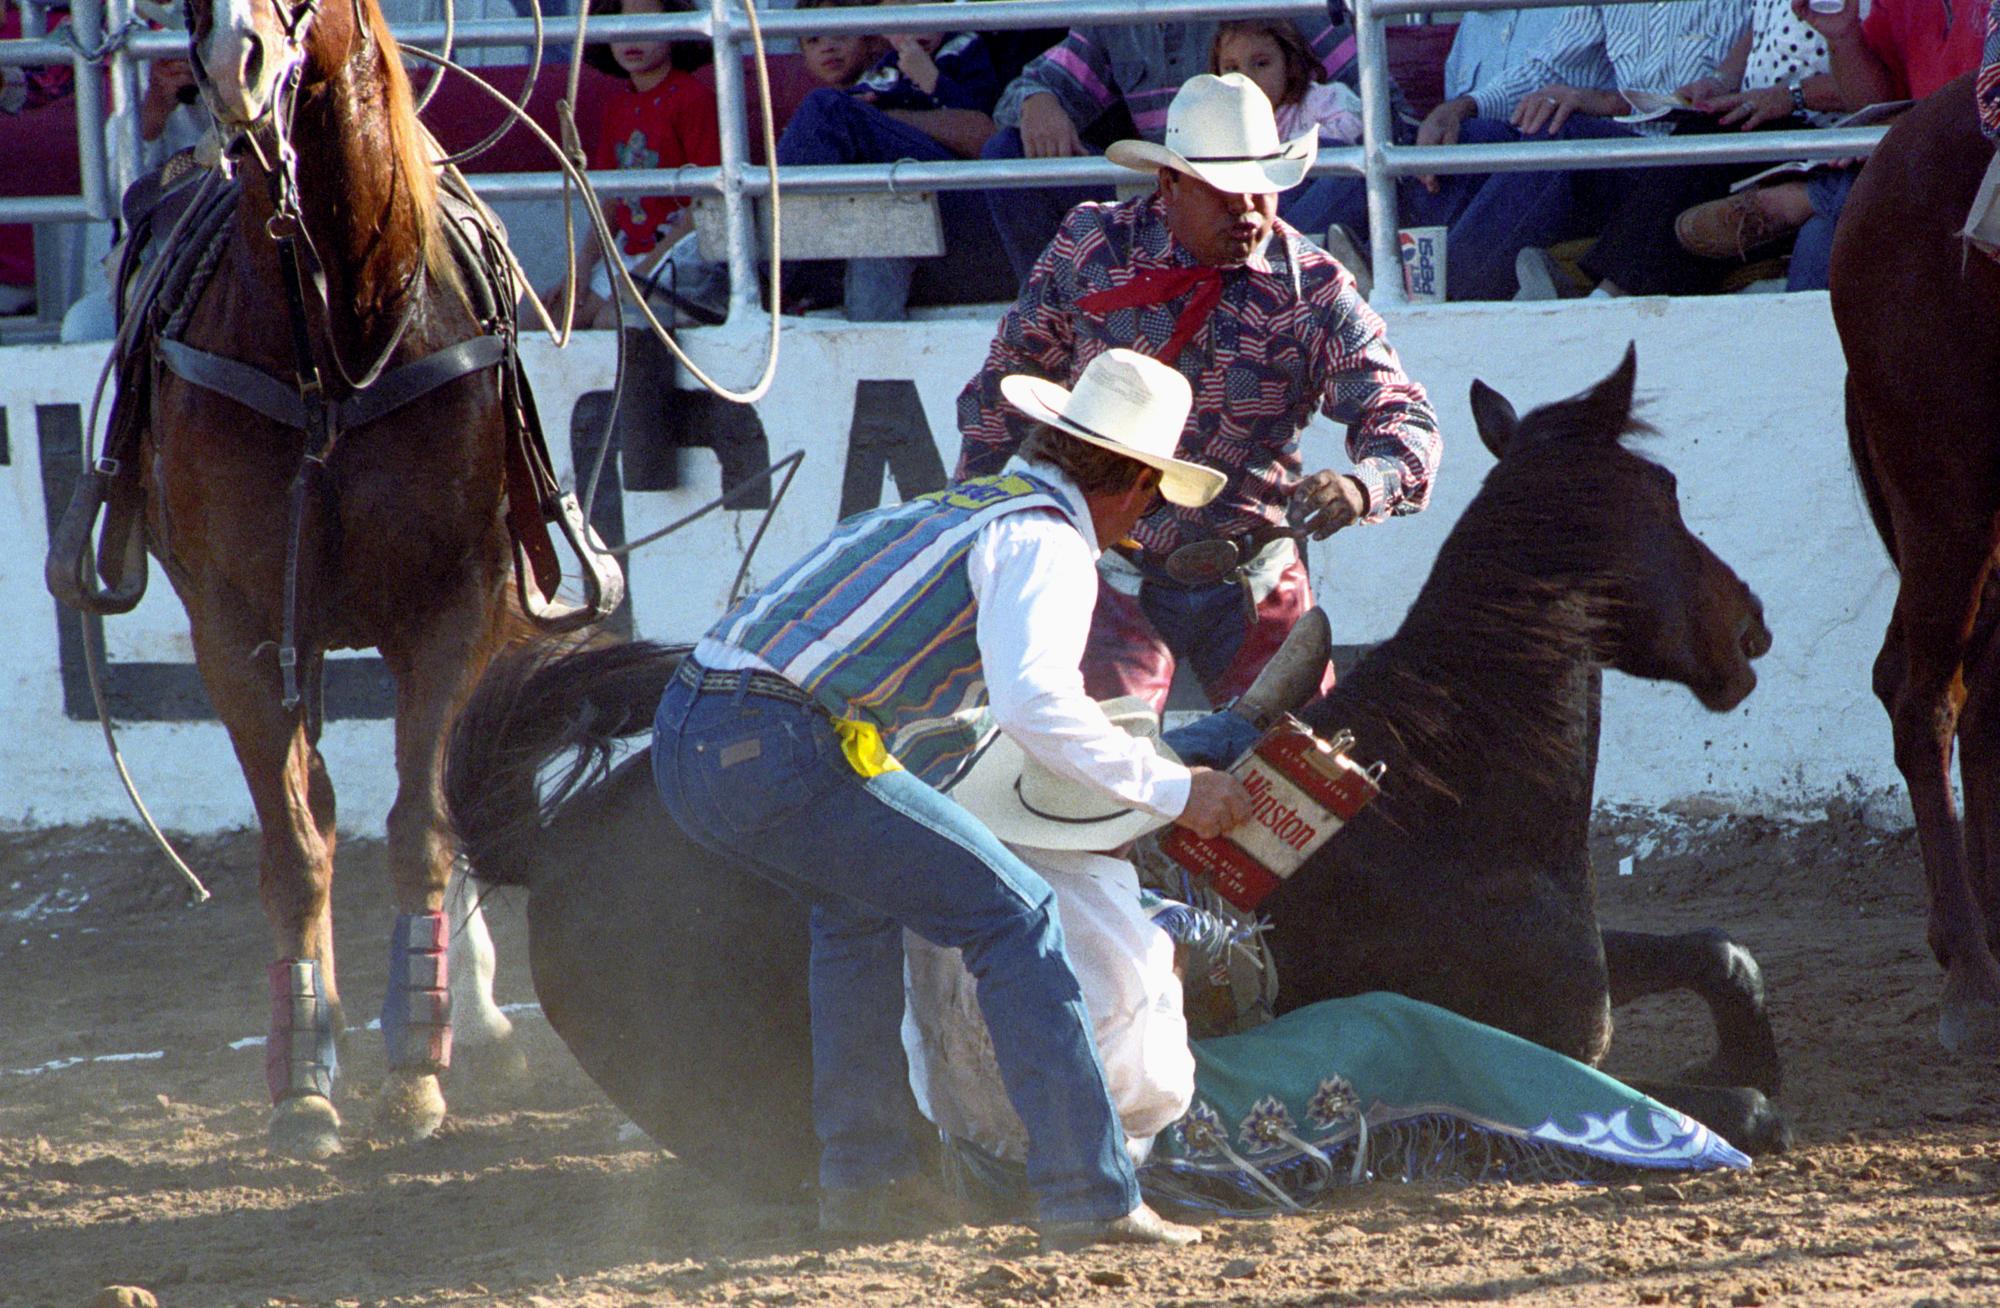 Imperial Valley Rodeo (1992) - Tough Hombre #5